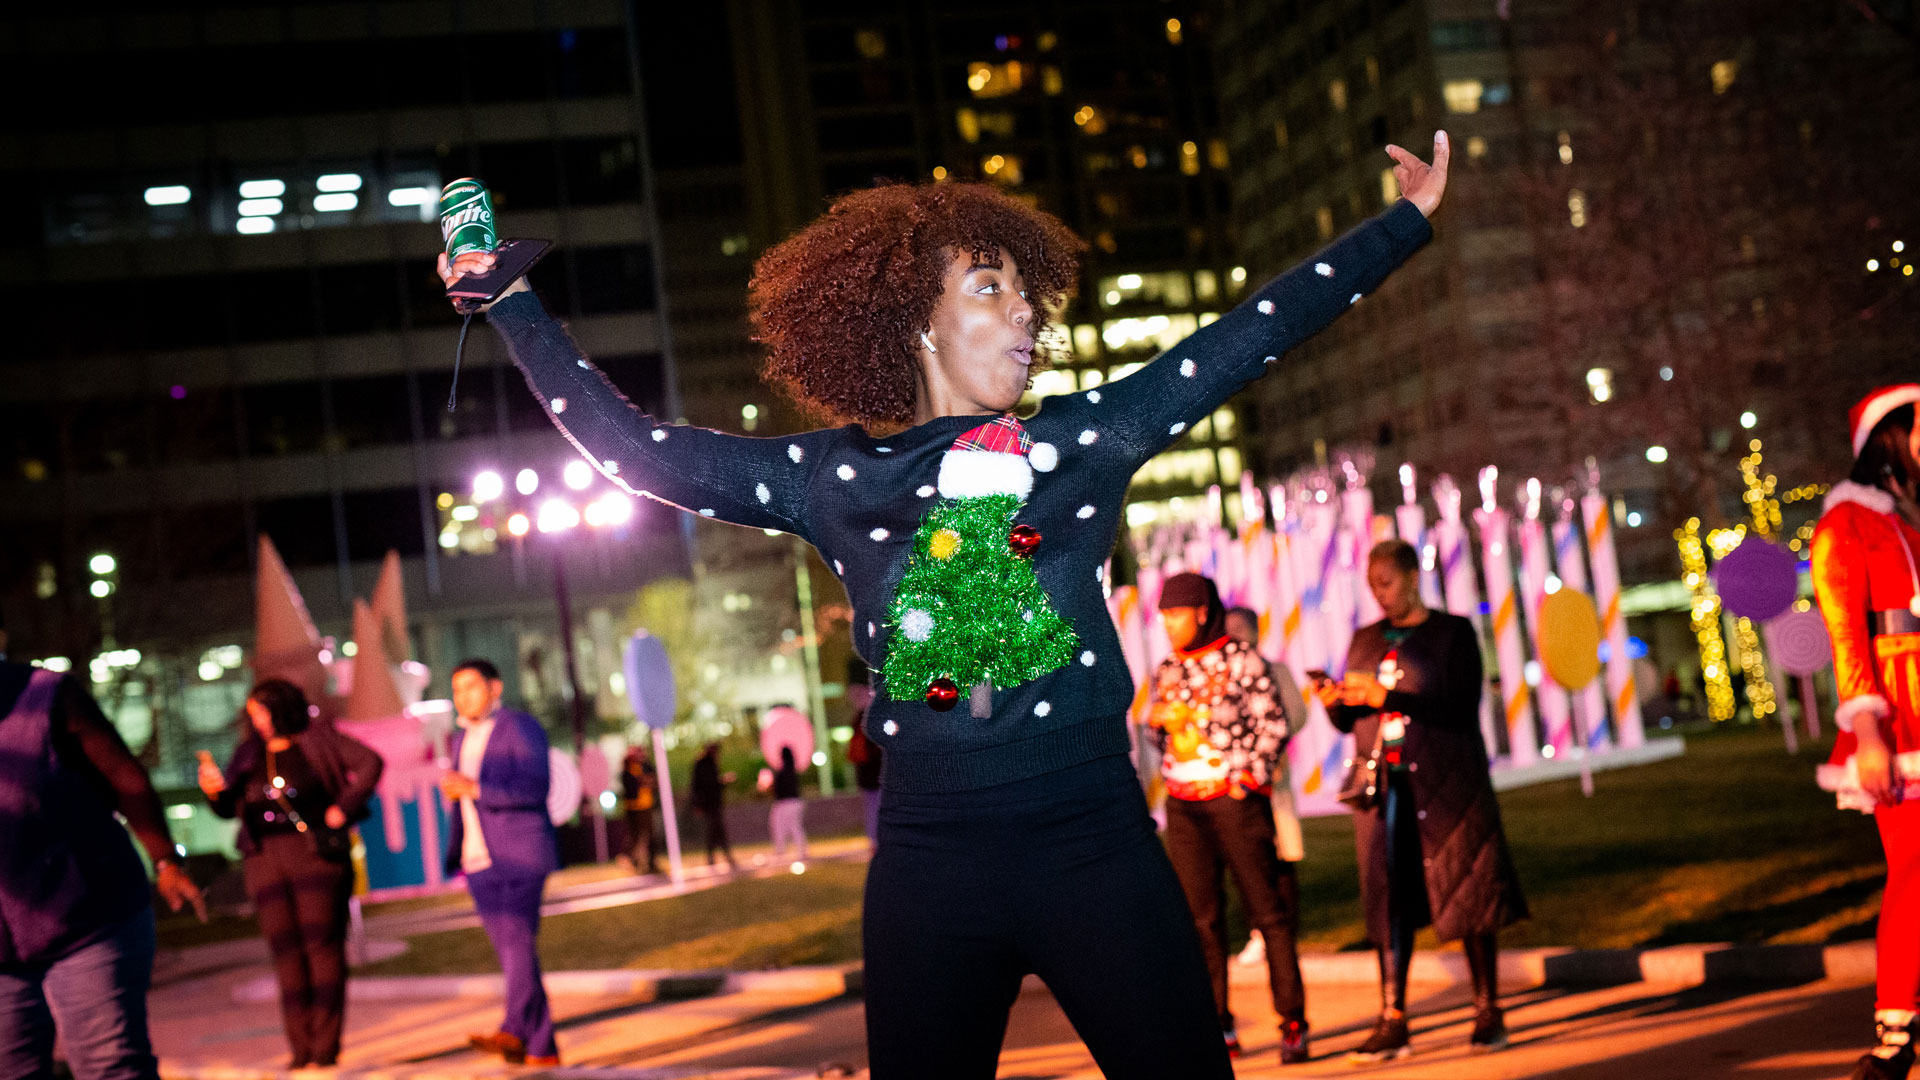 Dancing at Candy Lane in Center Plaza's Not So Silent Night holiday party.